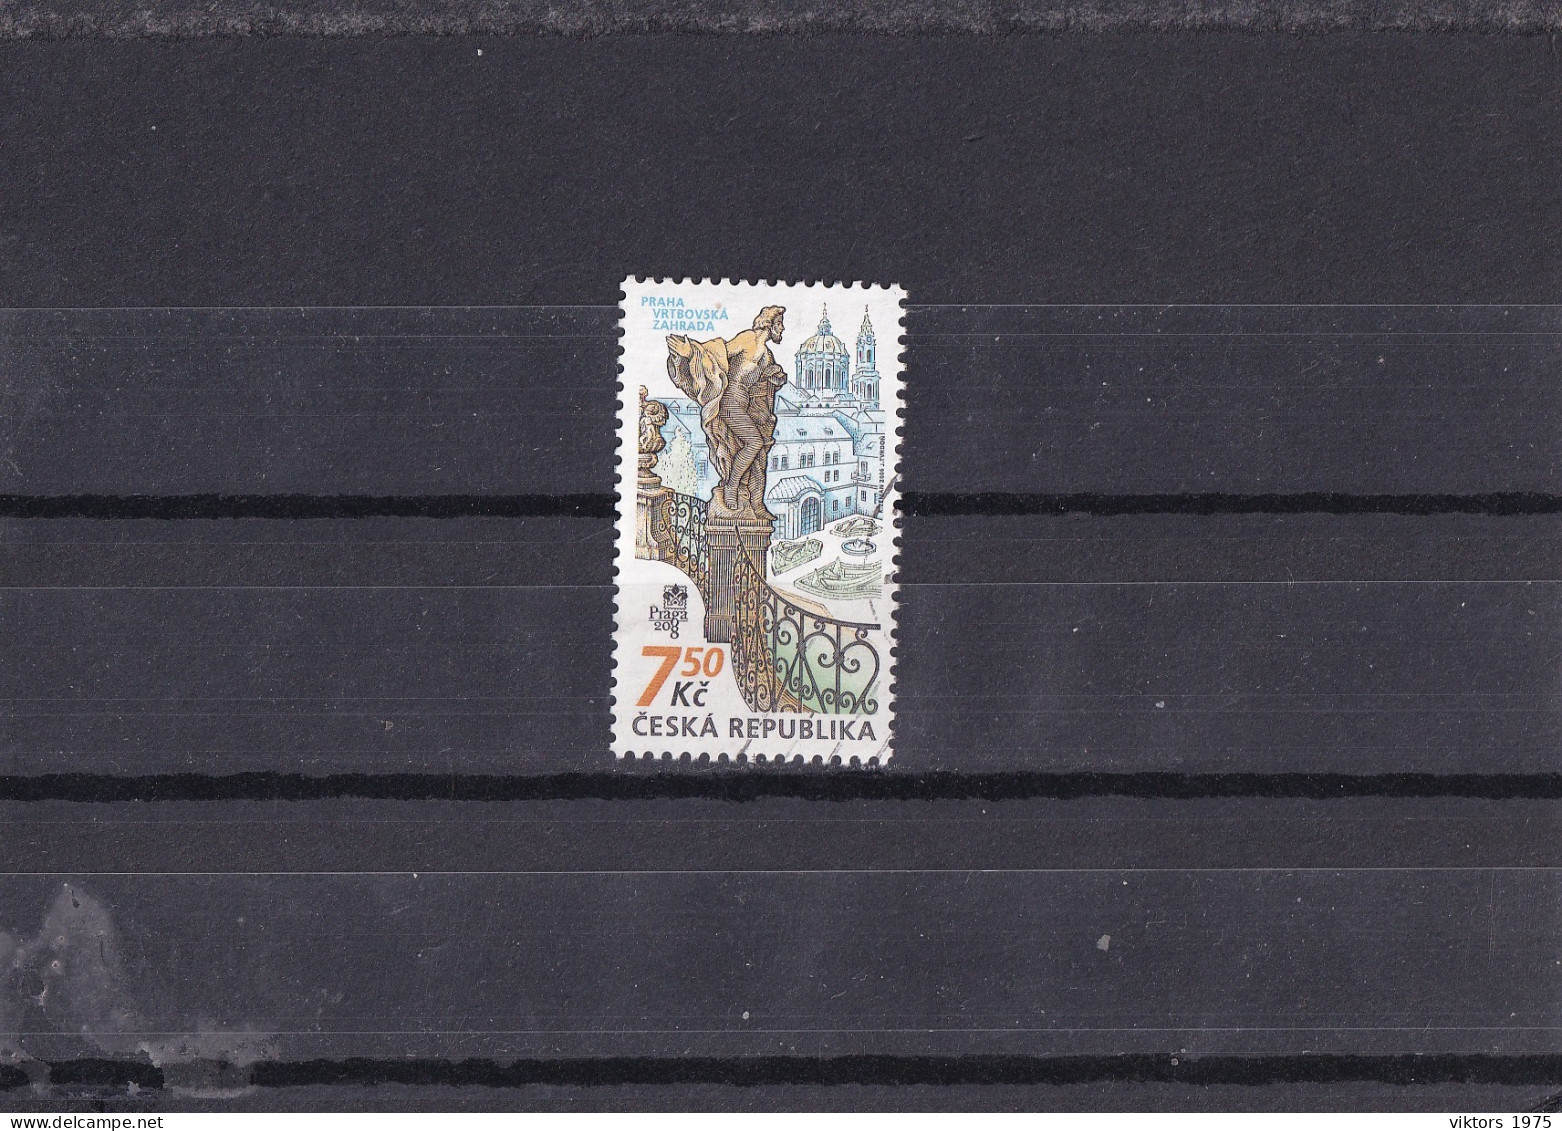 Used Stamp Nr.491 In MICHEL Catalog - Used Stamps